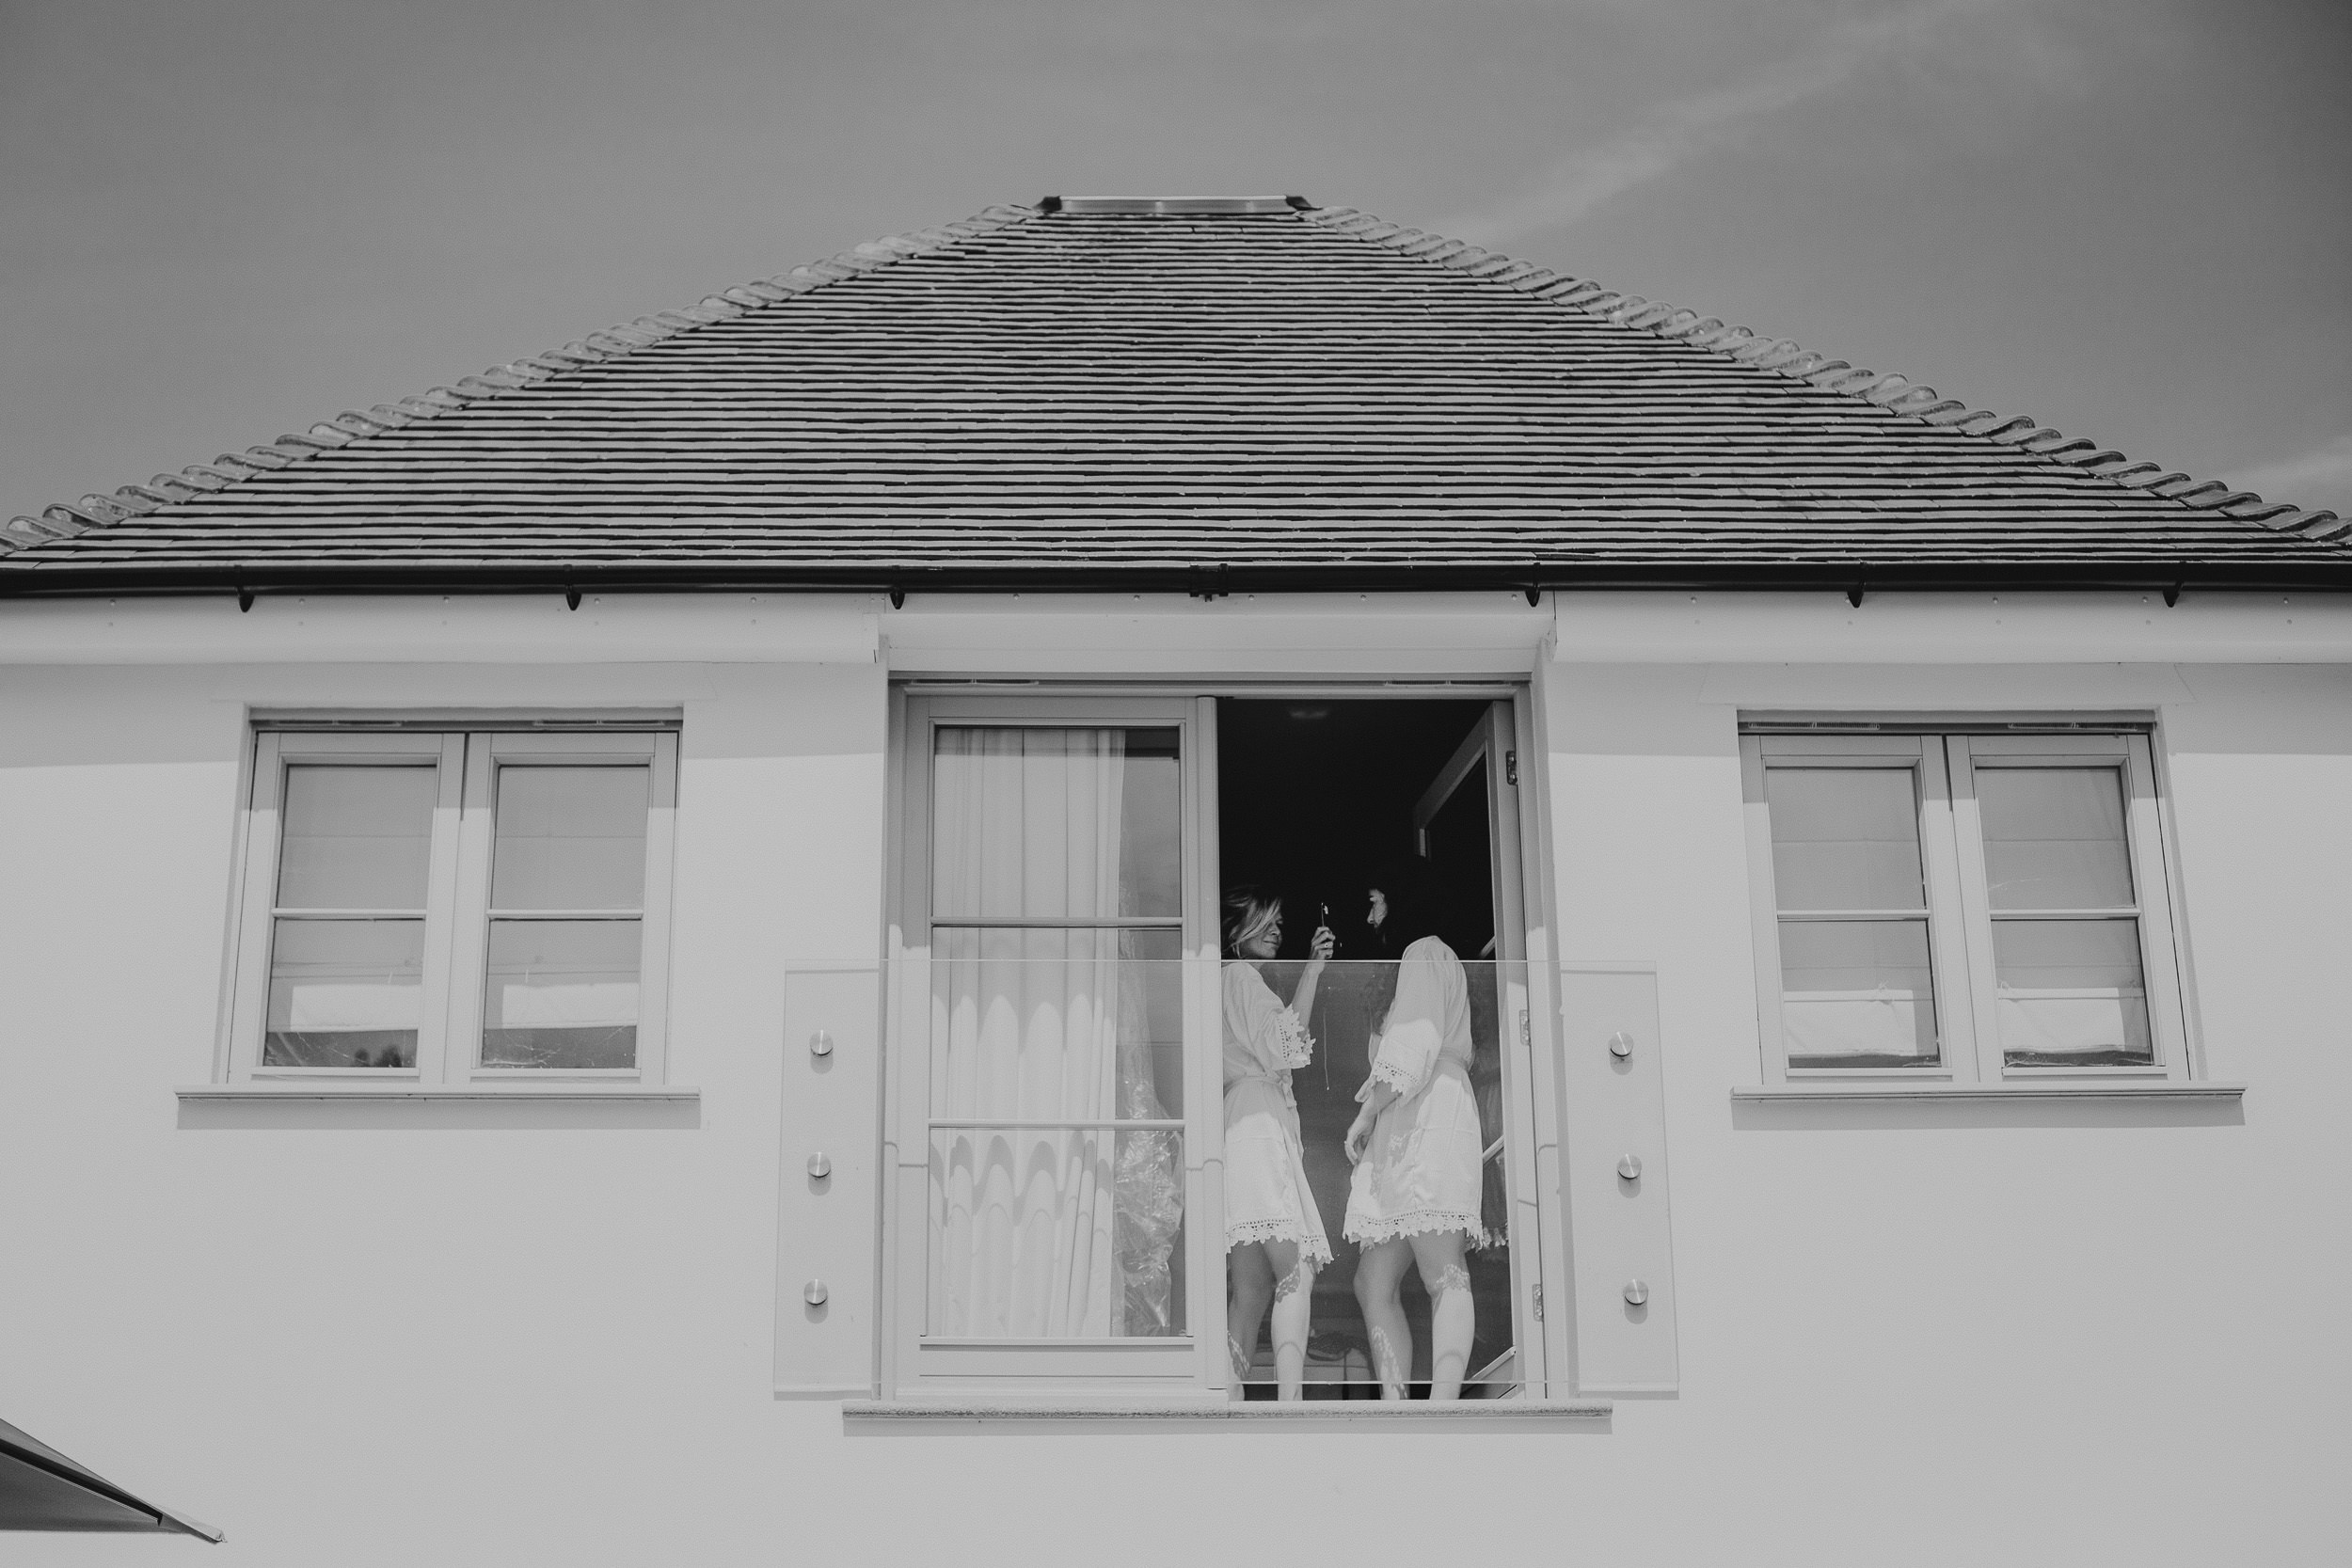 Black and white wedding photo of two women standing in the window of a house.